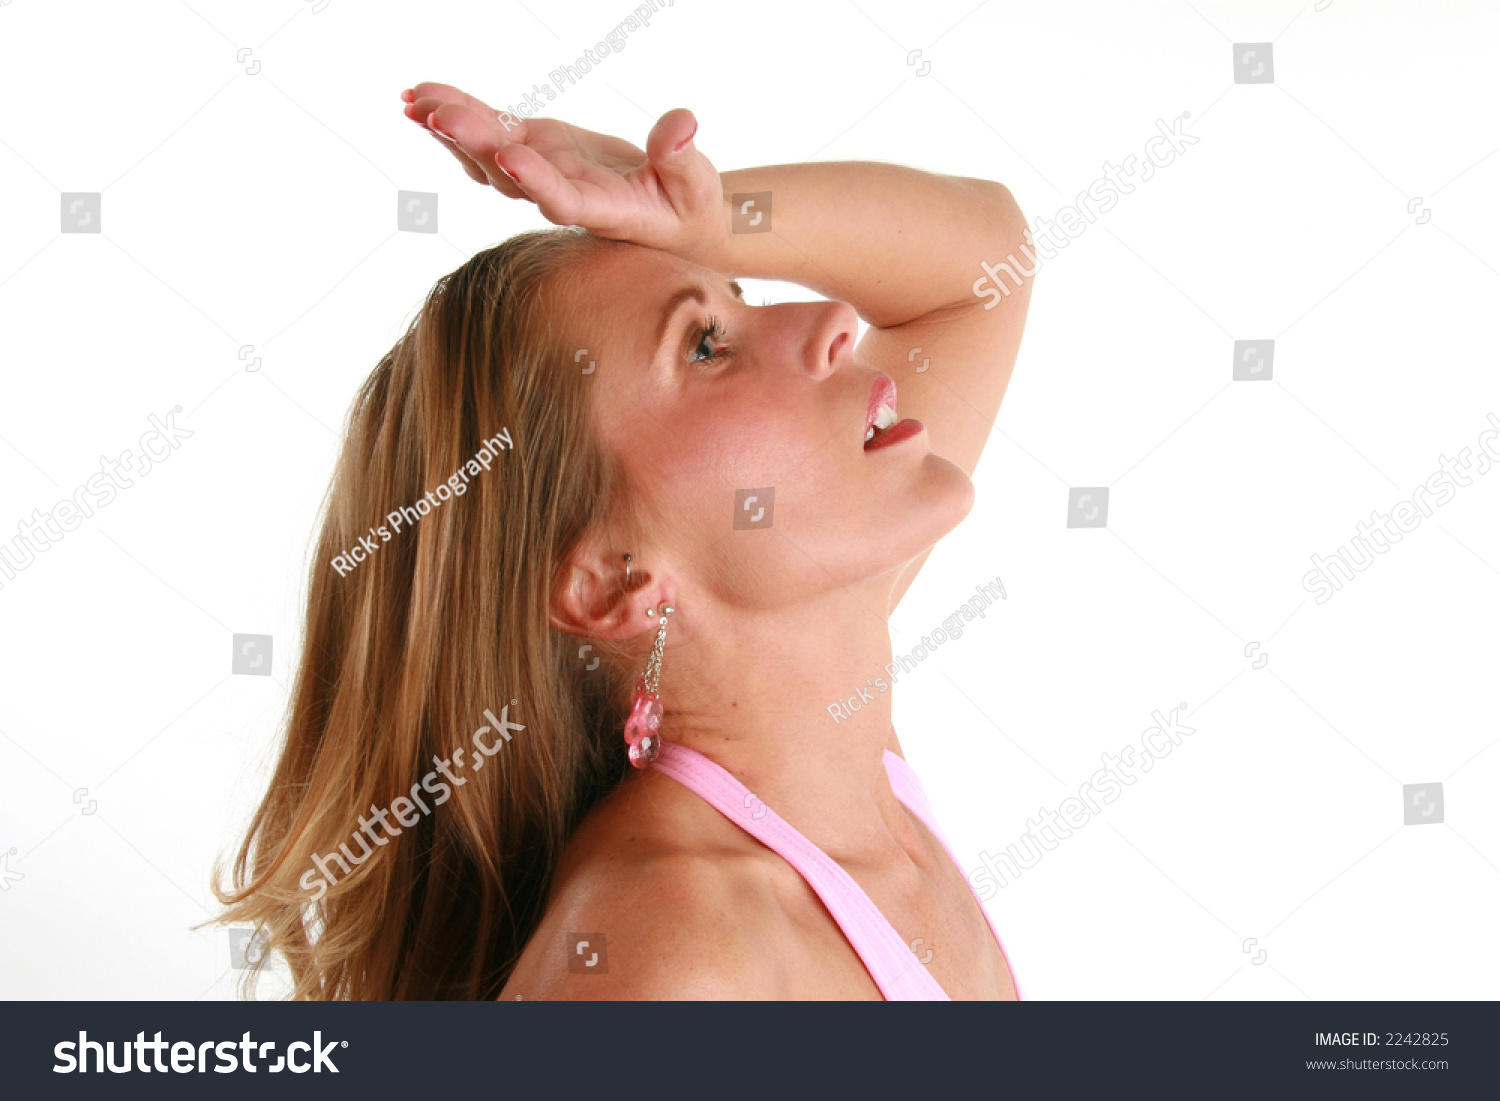 stock-photo-actress-being-melodramatic-2242825.jpg